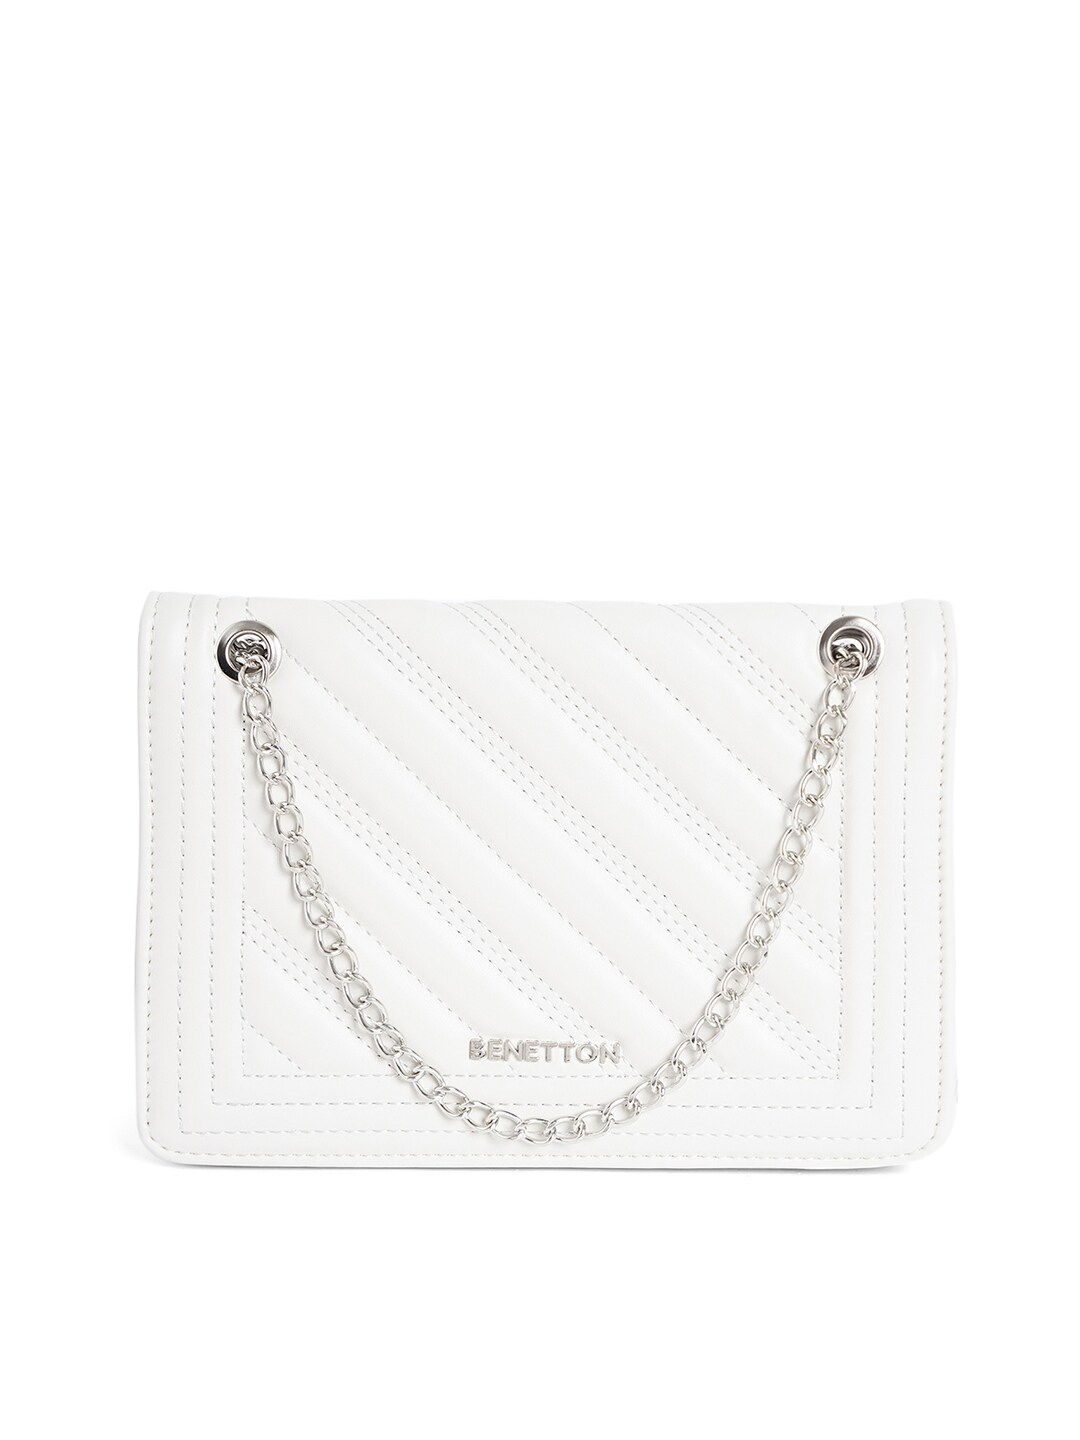 United Colors of Benetton White Textured Structured Handheld Bag Price in India